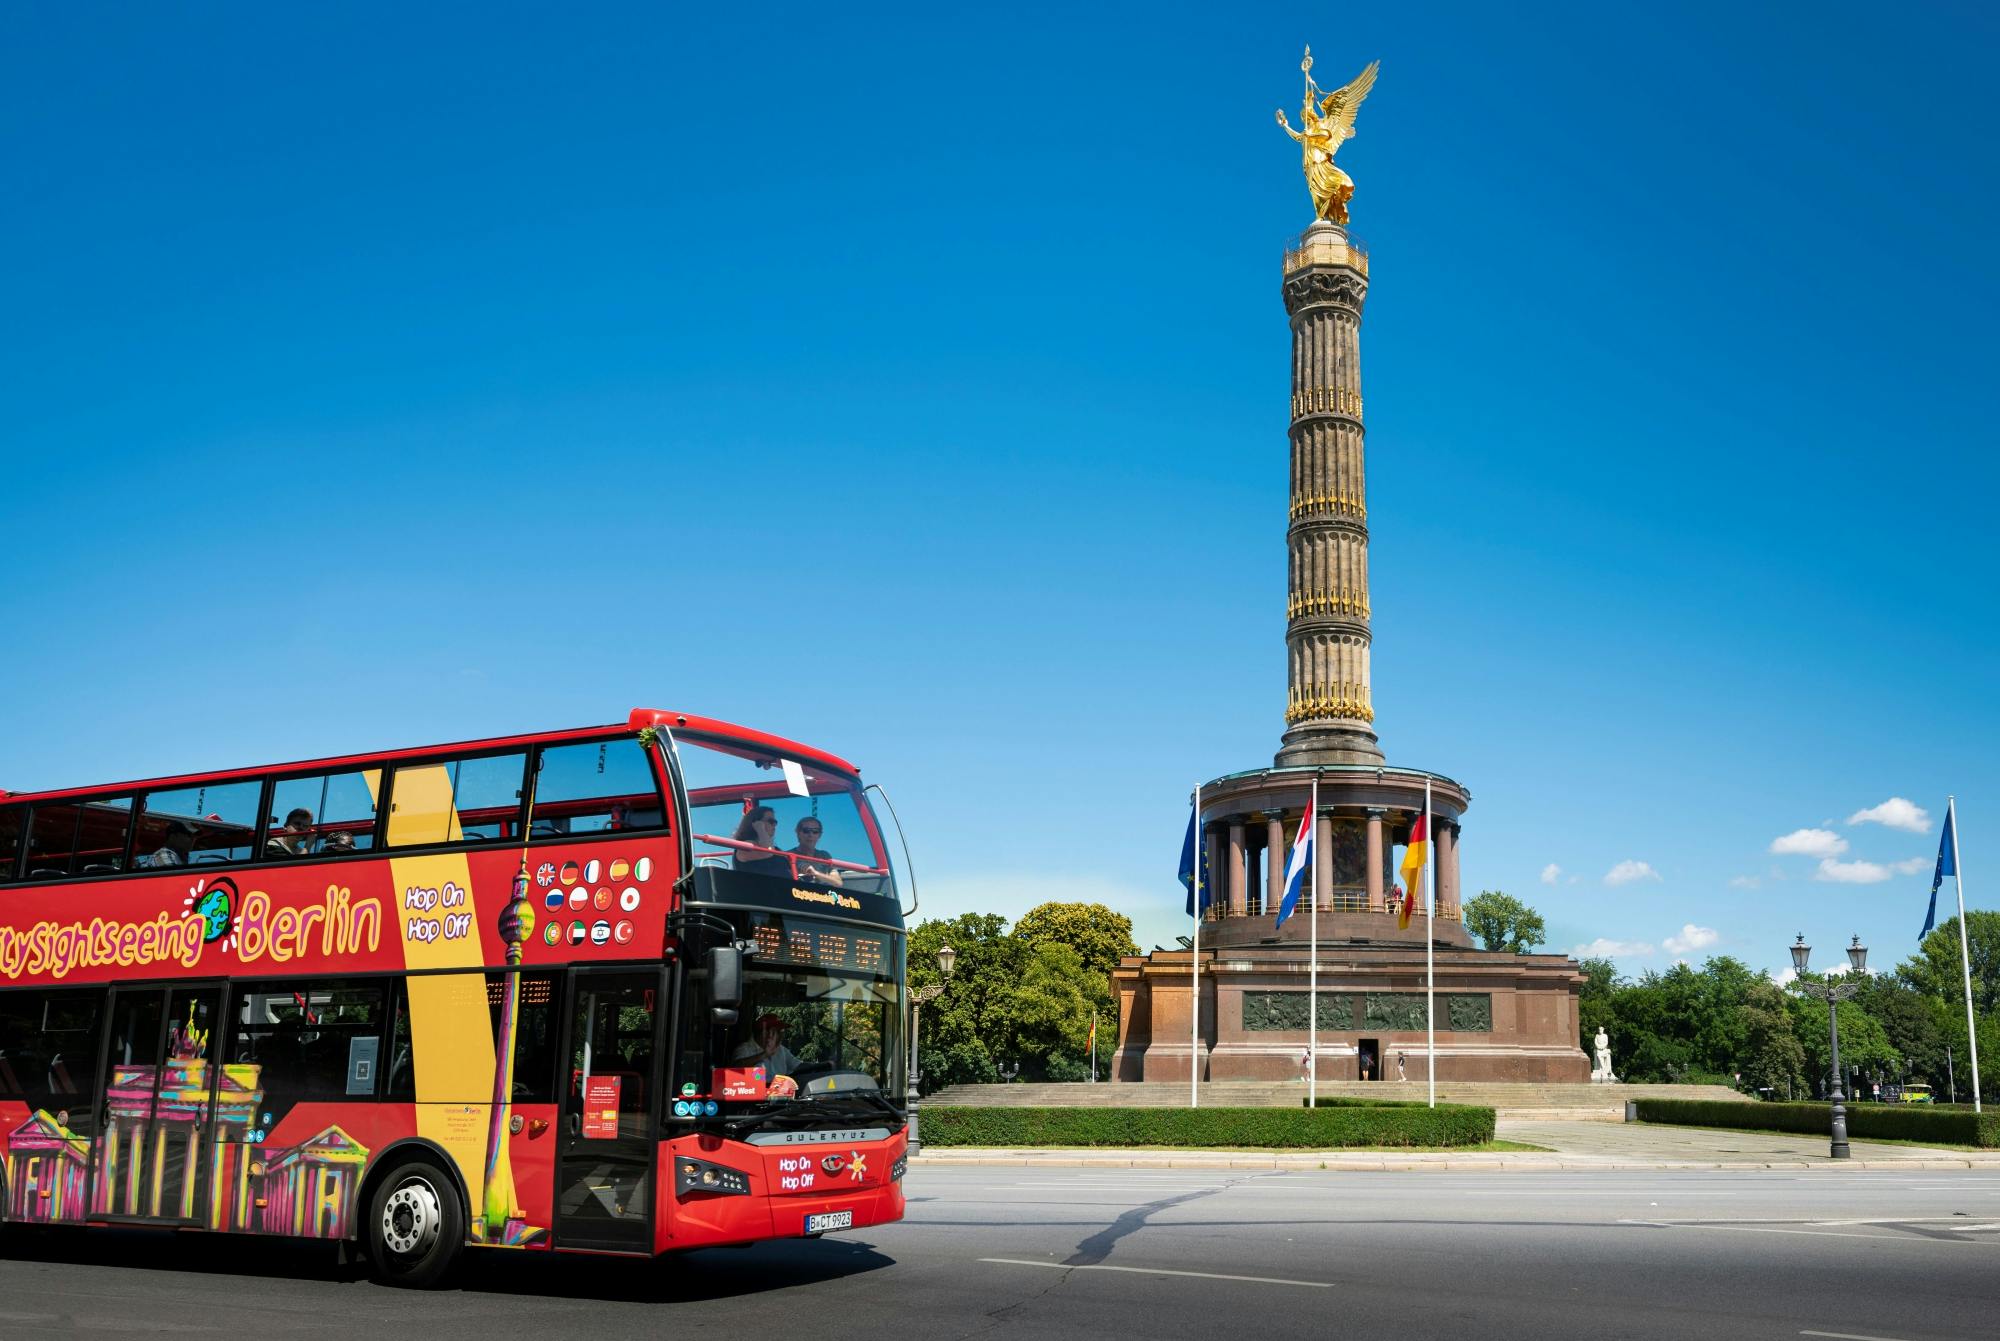 City Sightseeing hop on off bus tour of Berlin Musement